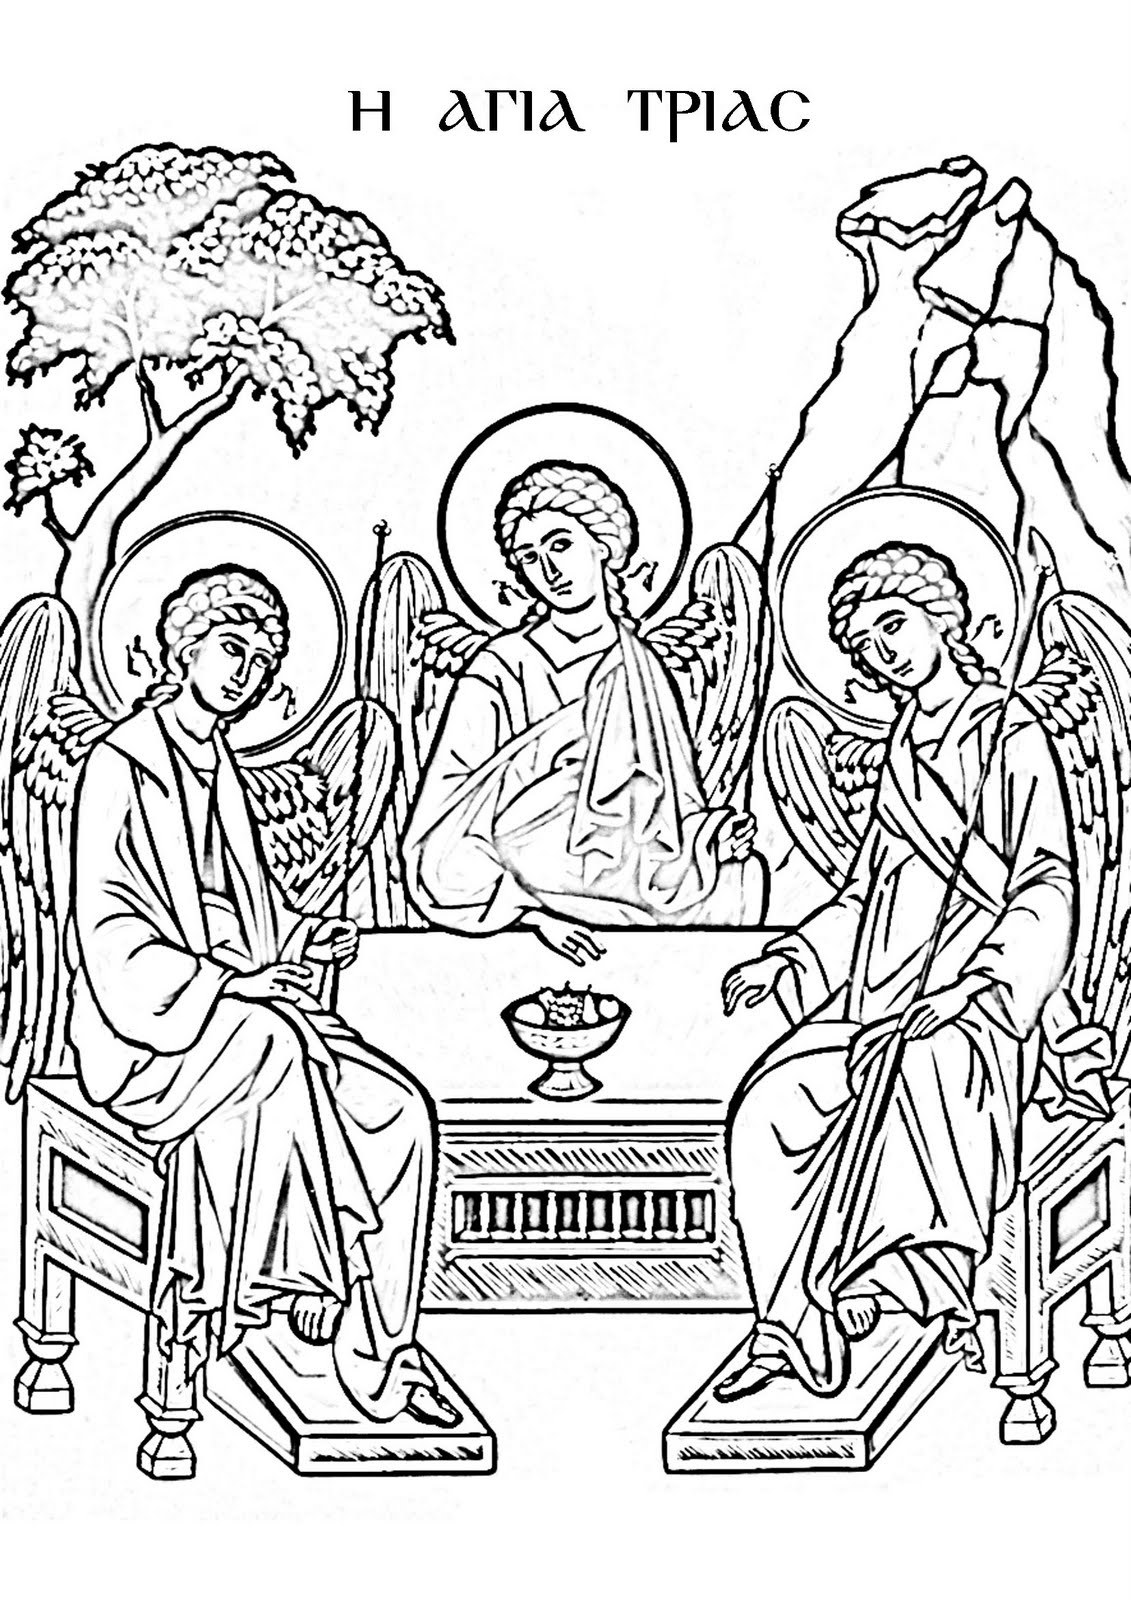 Orthodox Sunday School Resources — Coloring page: The Holy Trinity